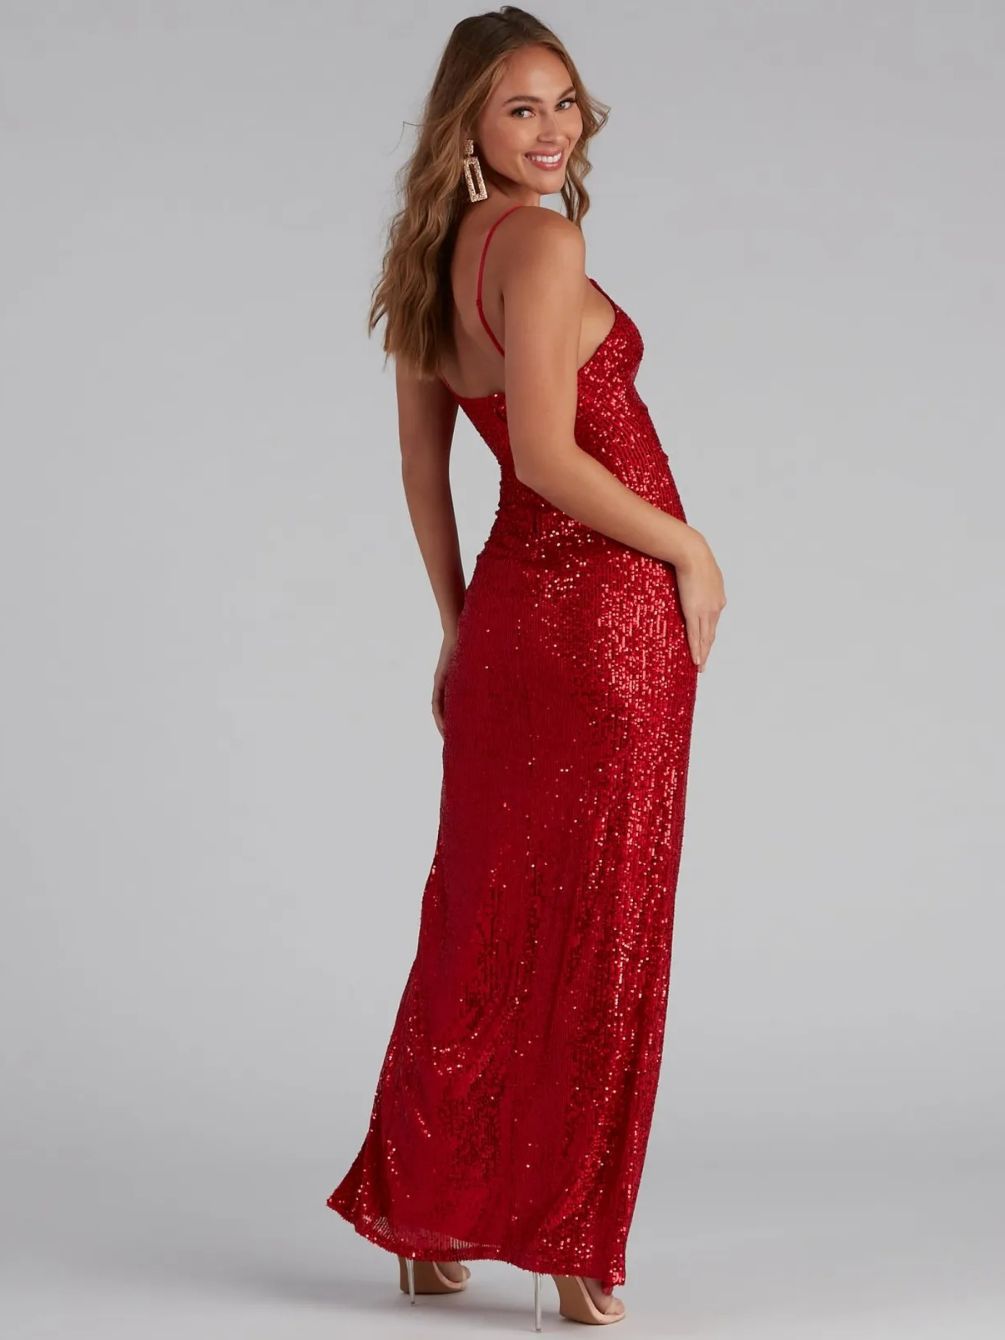 Spaghetti Straps Backless High Slit Slim Fit Sequin Gown - Red